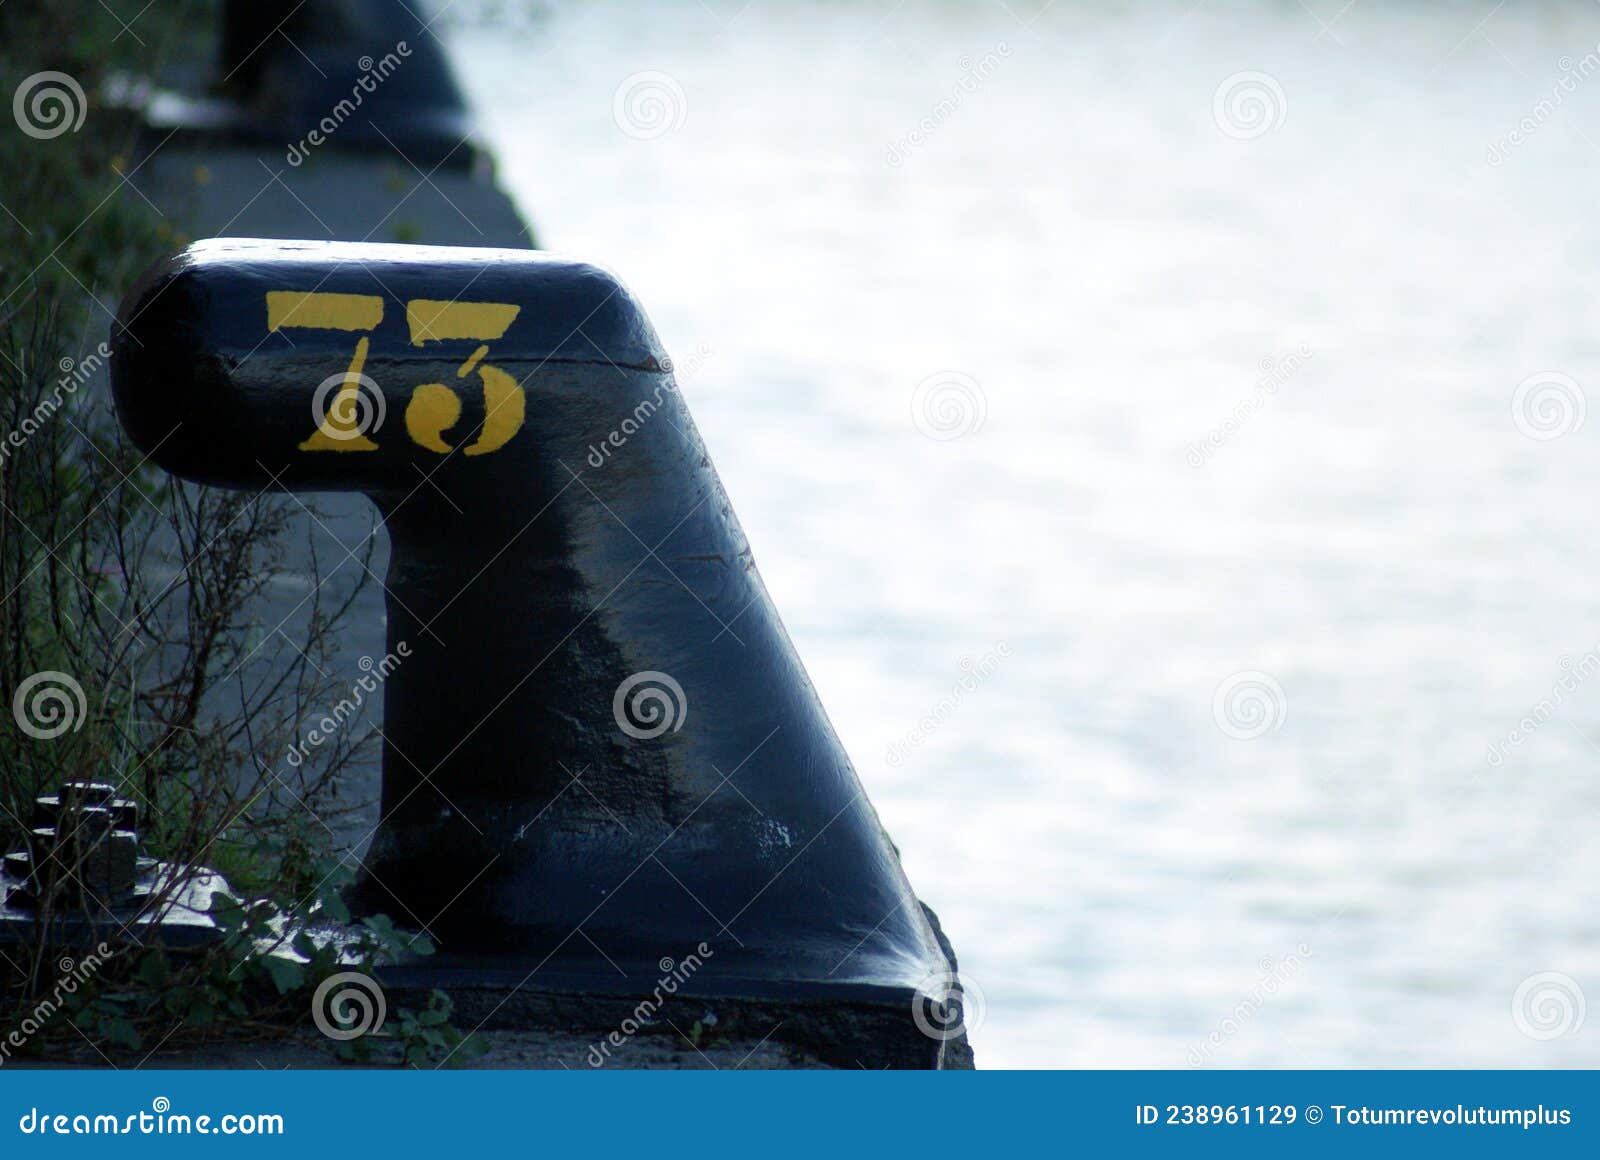 number seventy three 73 in yellow colour on black iron noray